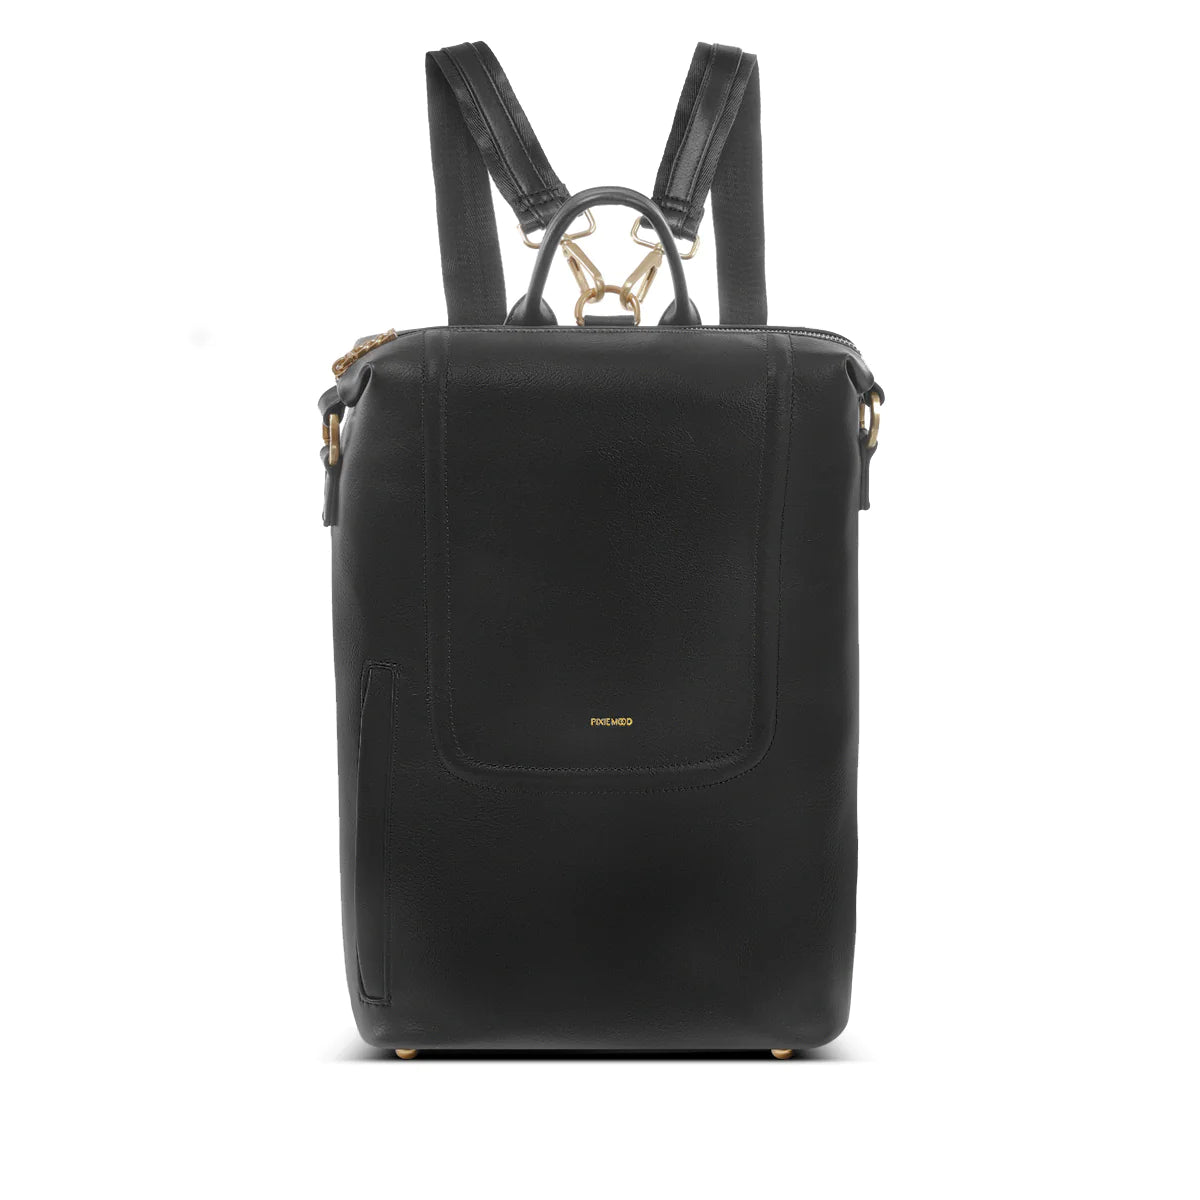 PIXIE MOOD Blossom Backpack - Small